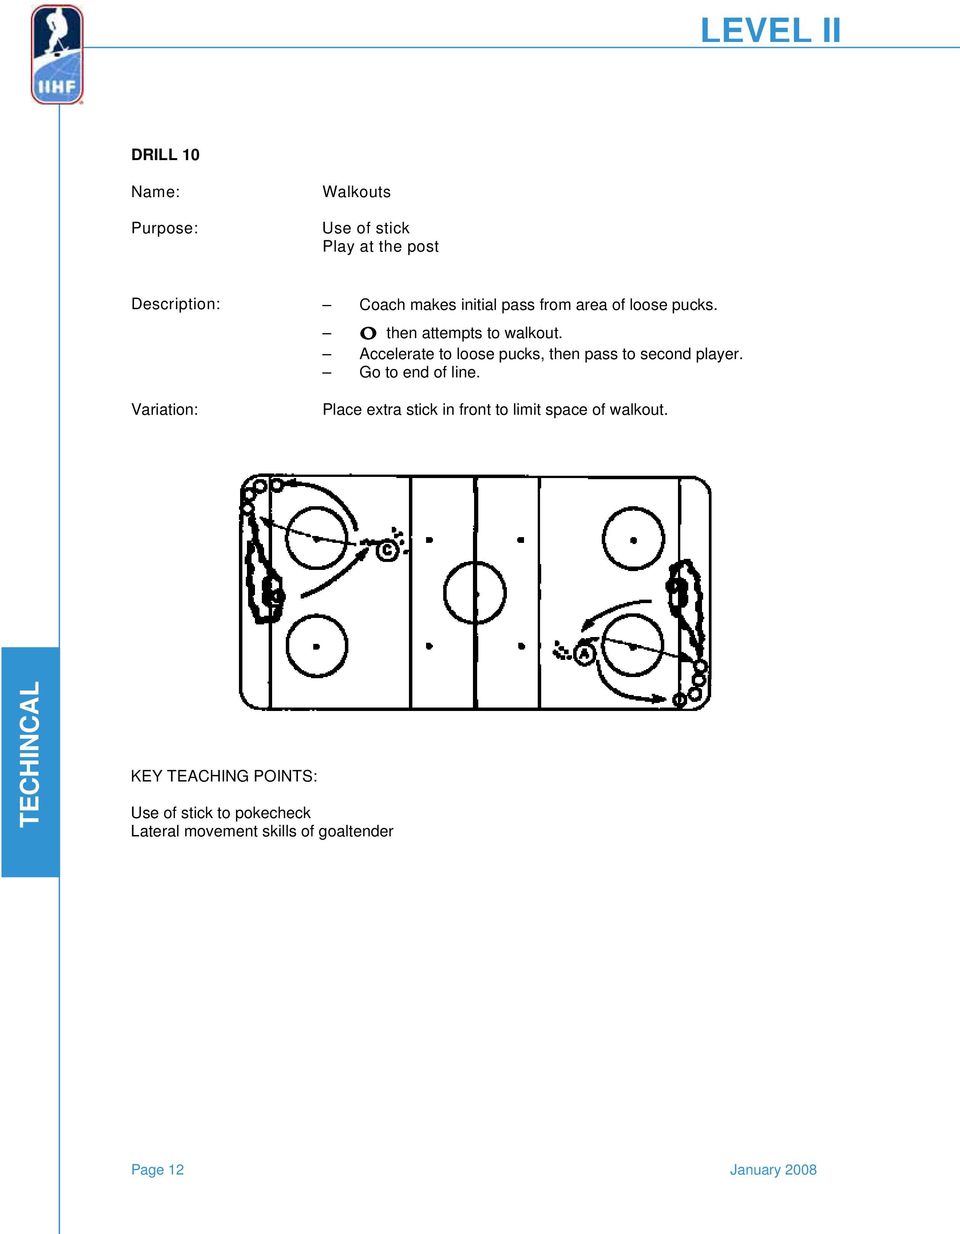 Accelerate to loose pucks, then pass to second player. Go to end of line.